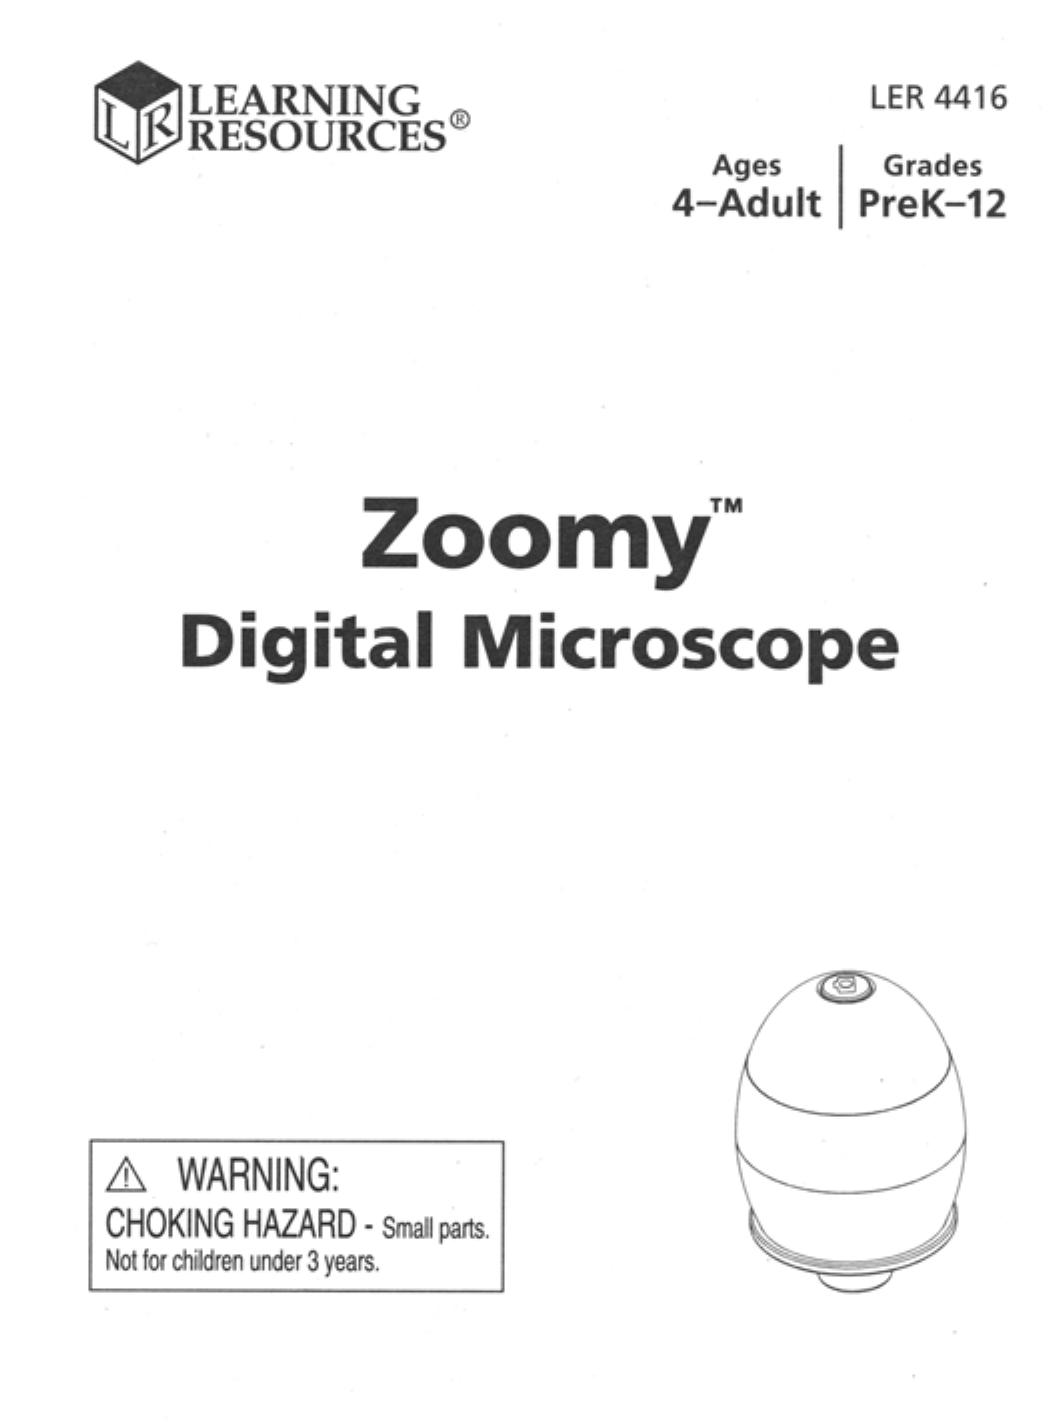 Learning Resources LER 4416 Microscope & Magnifier User Manual